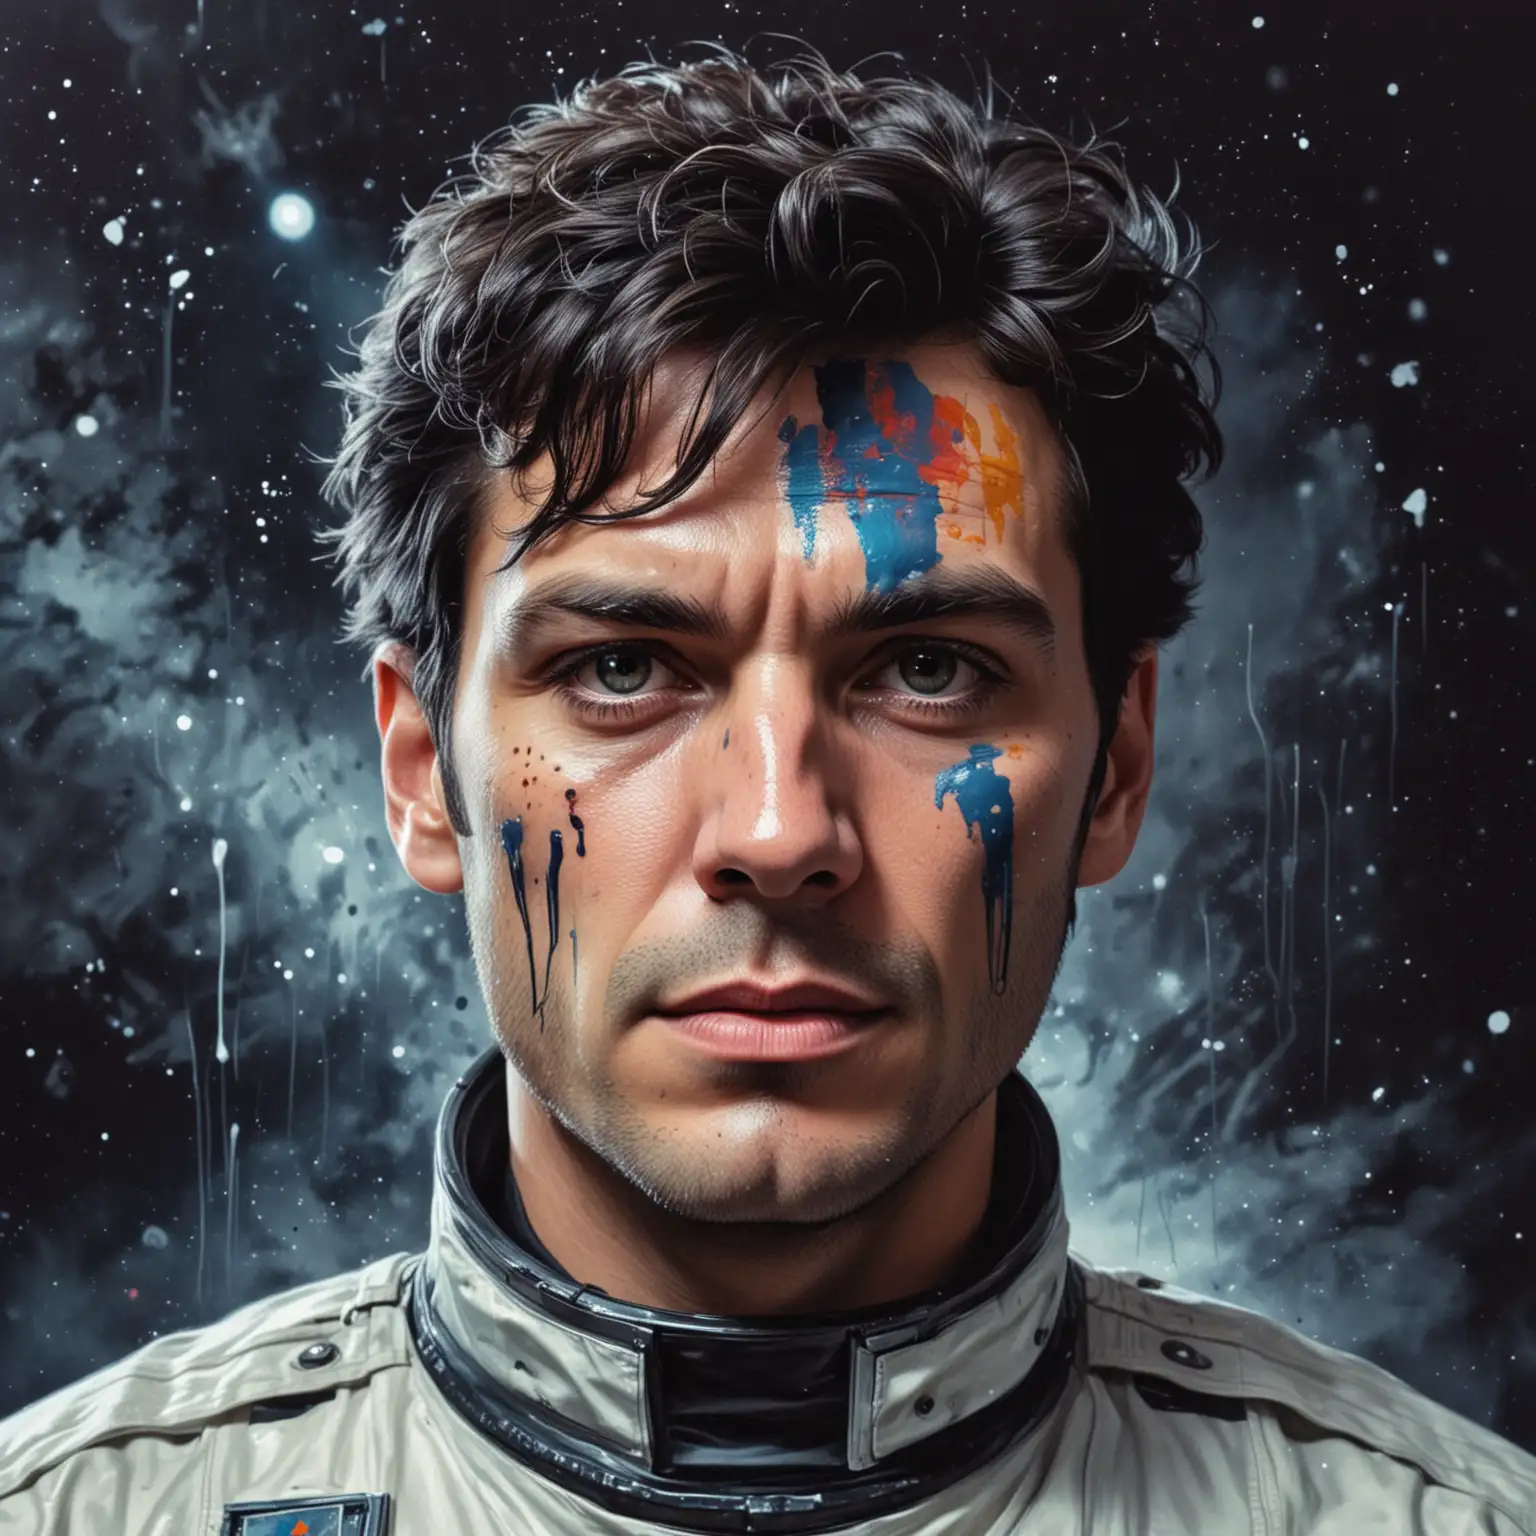 eighties sci-fi painted art style; close up portrait; male human in space prison uniform with paintcan, paint splotches on face